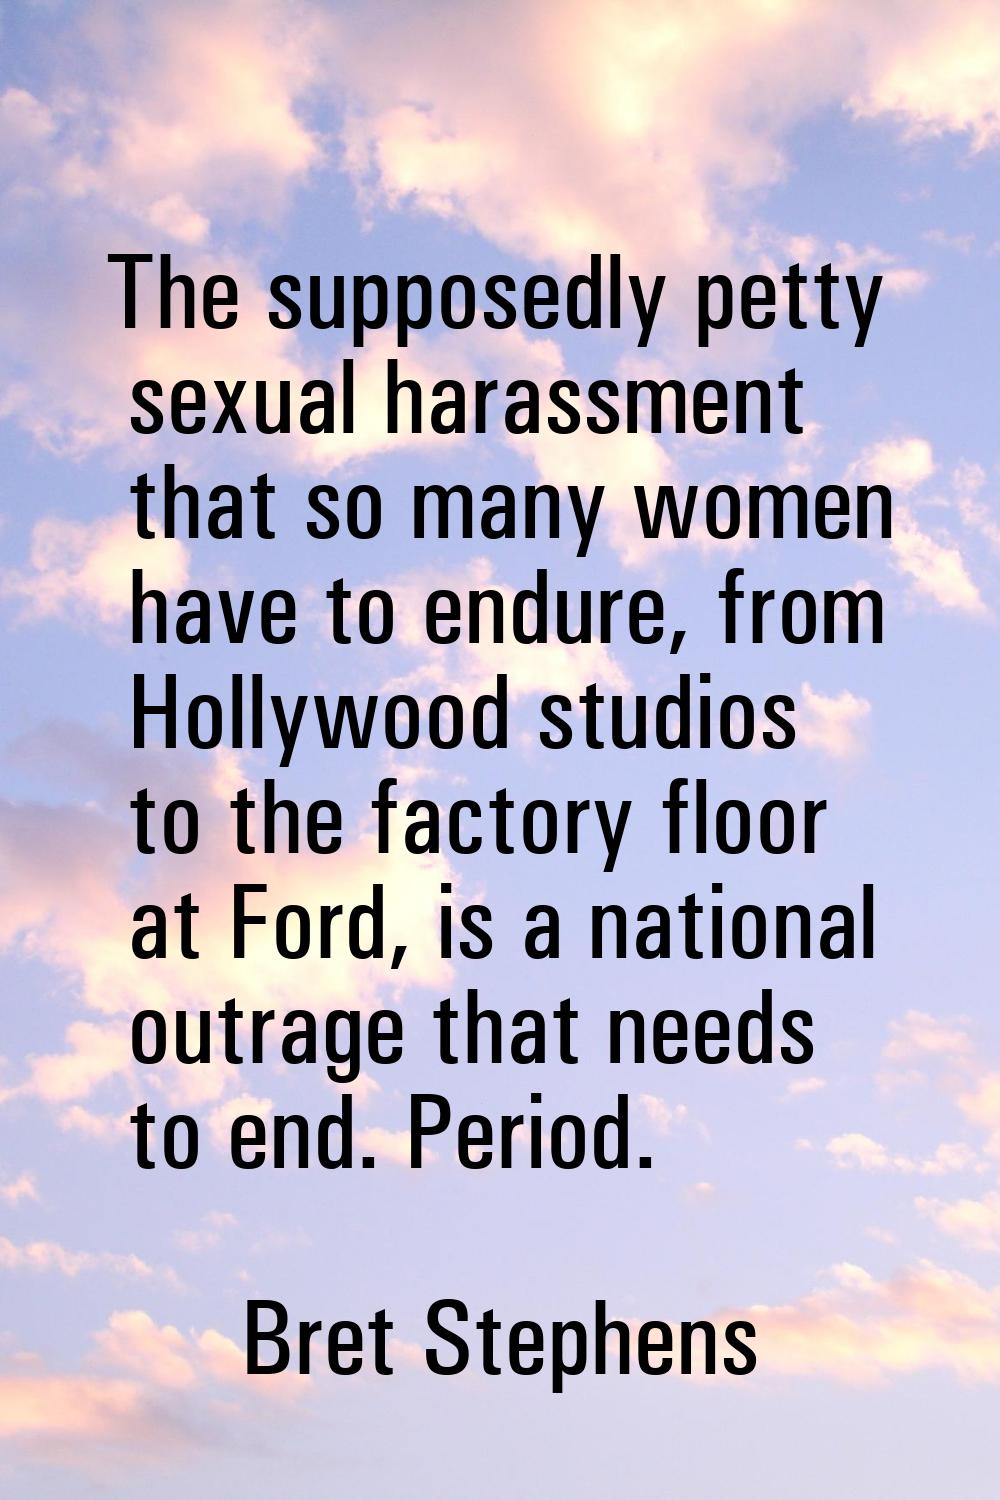 The supposedly petty sexual harassment that so many women have to endure, from Hollywood studios to